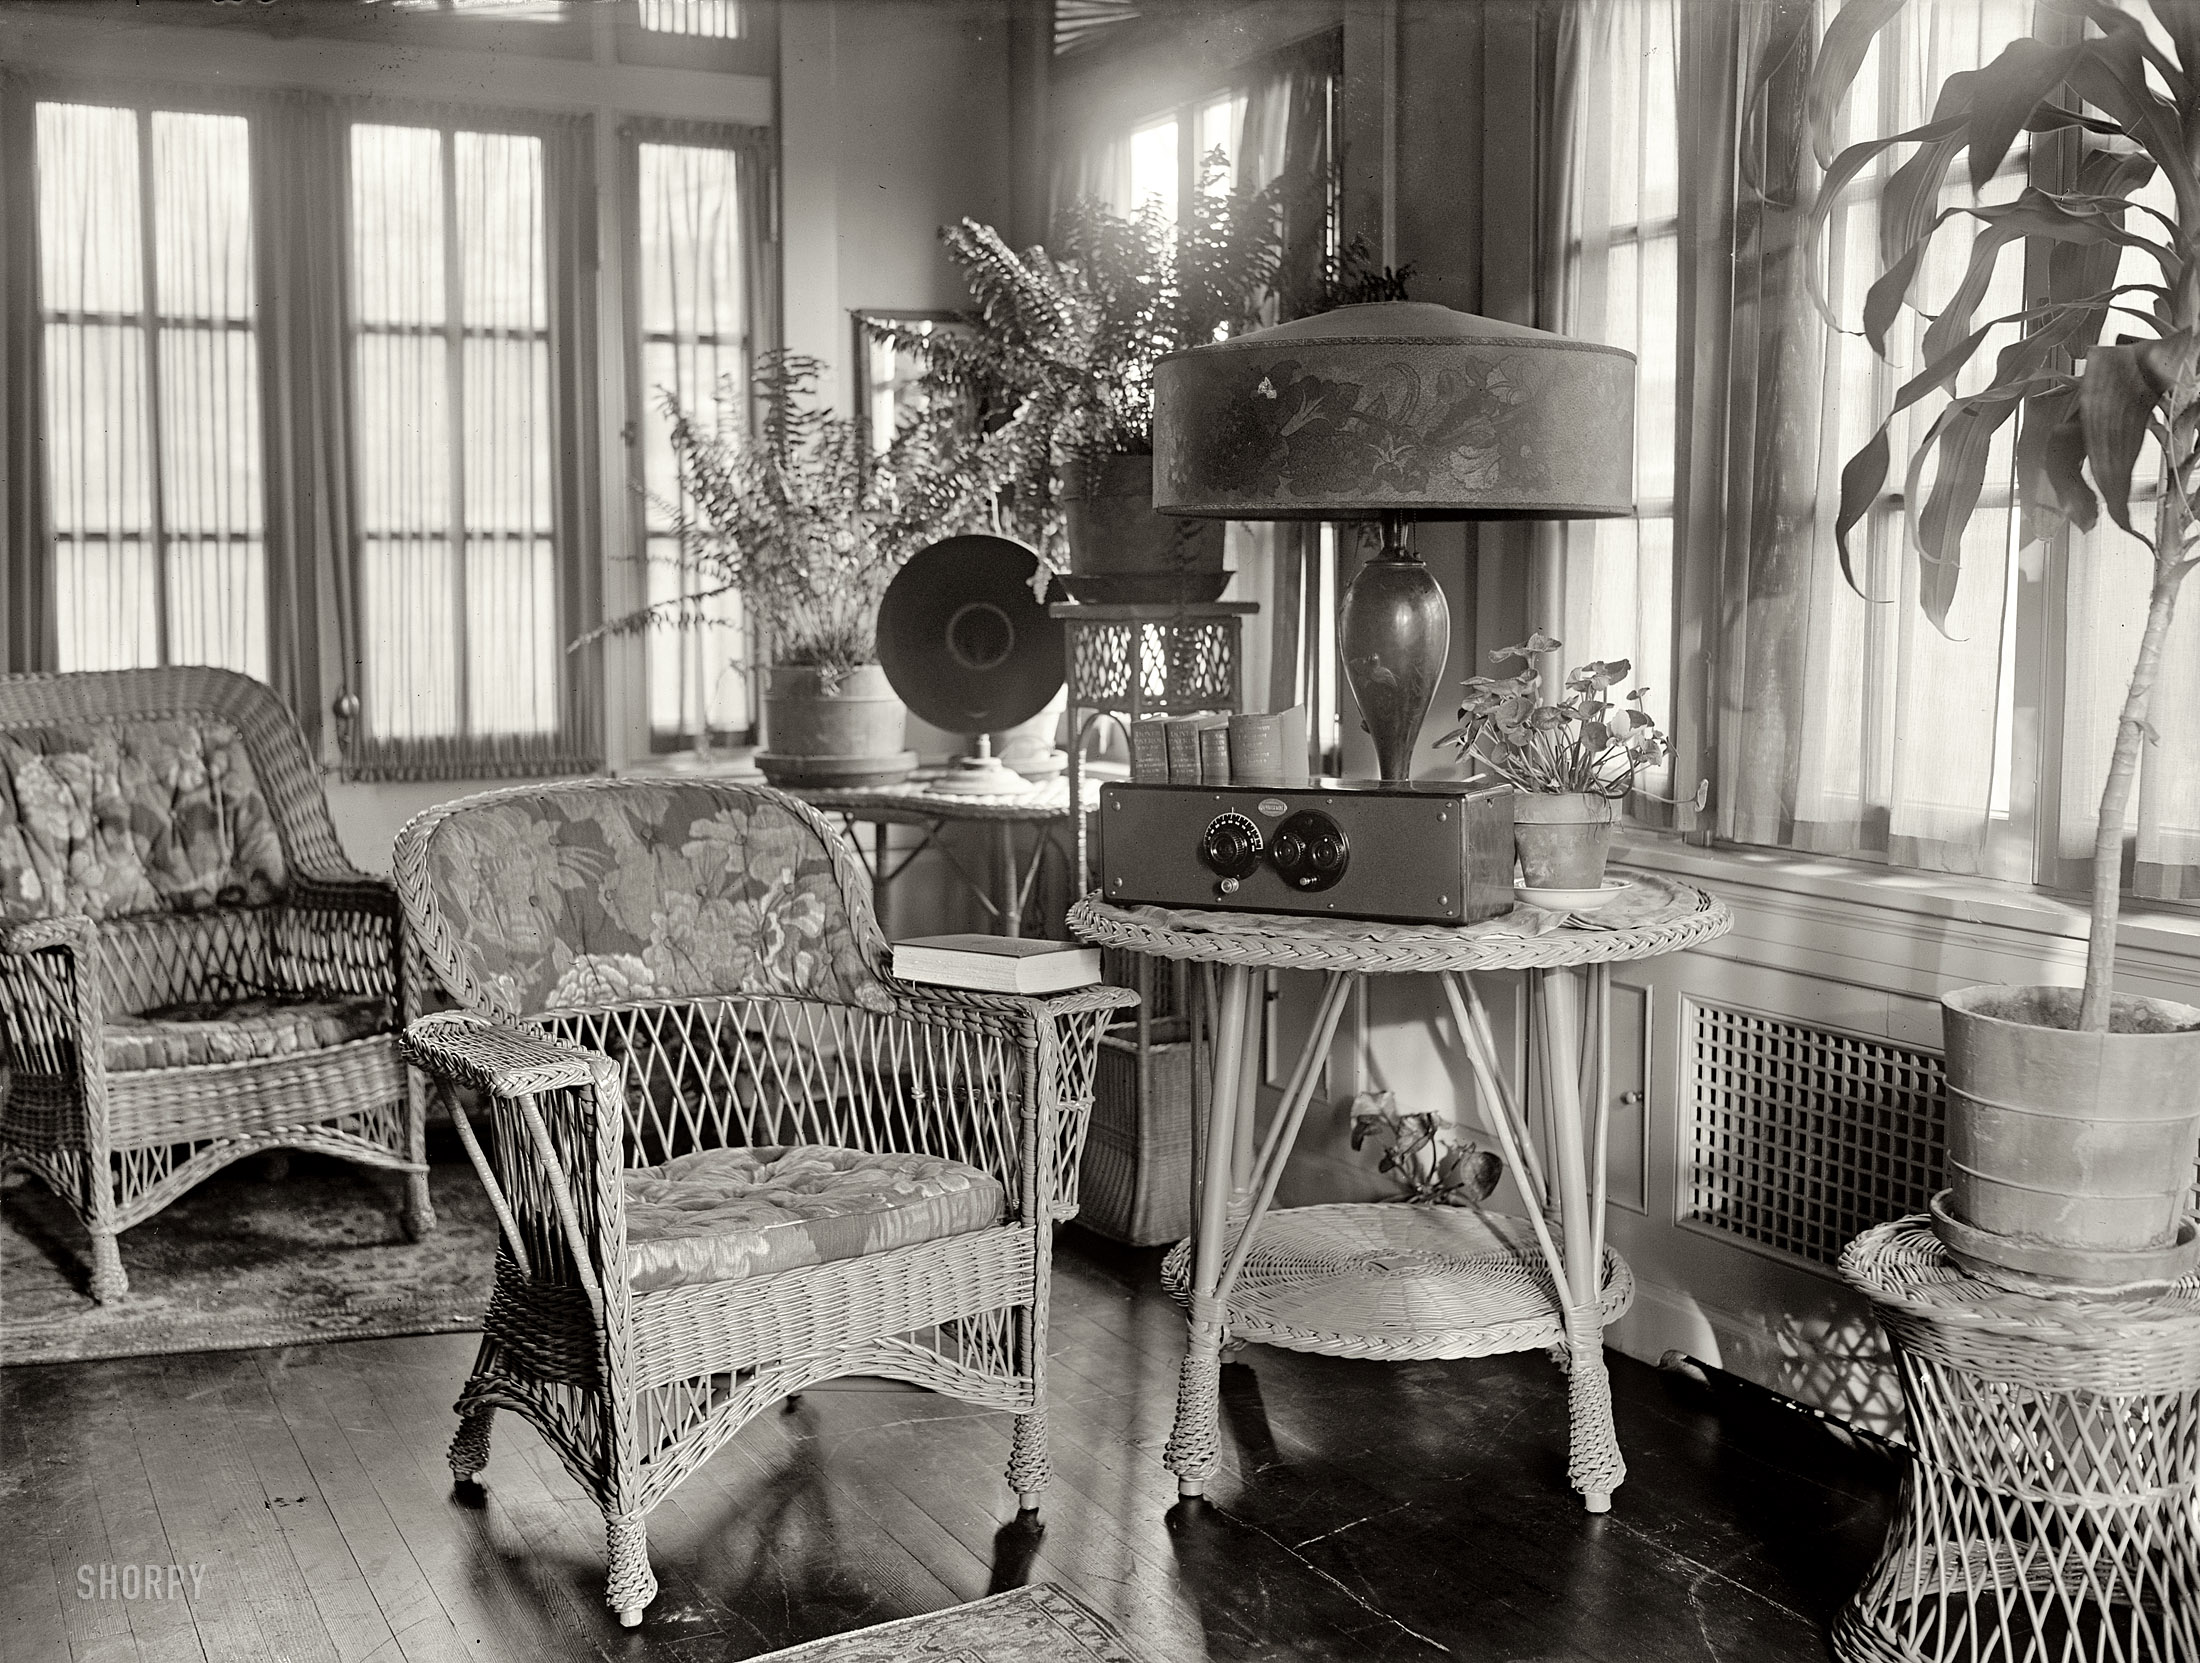 Washington, D.C., circa 1926. "Home of Mary Roberts Rinehart," prolific writer of mysteries. National Photo Company Collection glass negative. View full size.